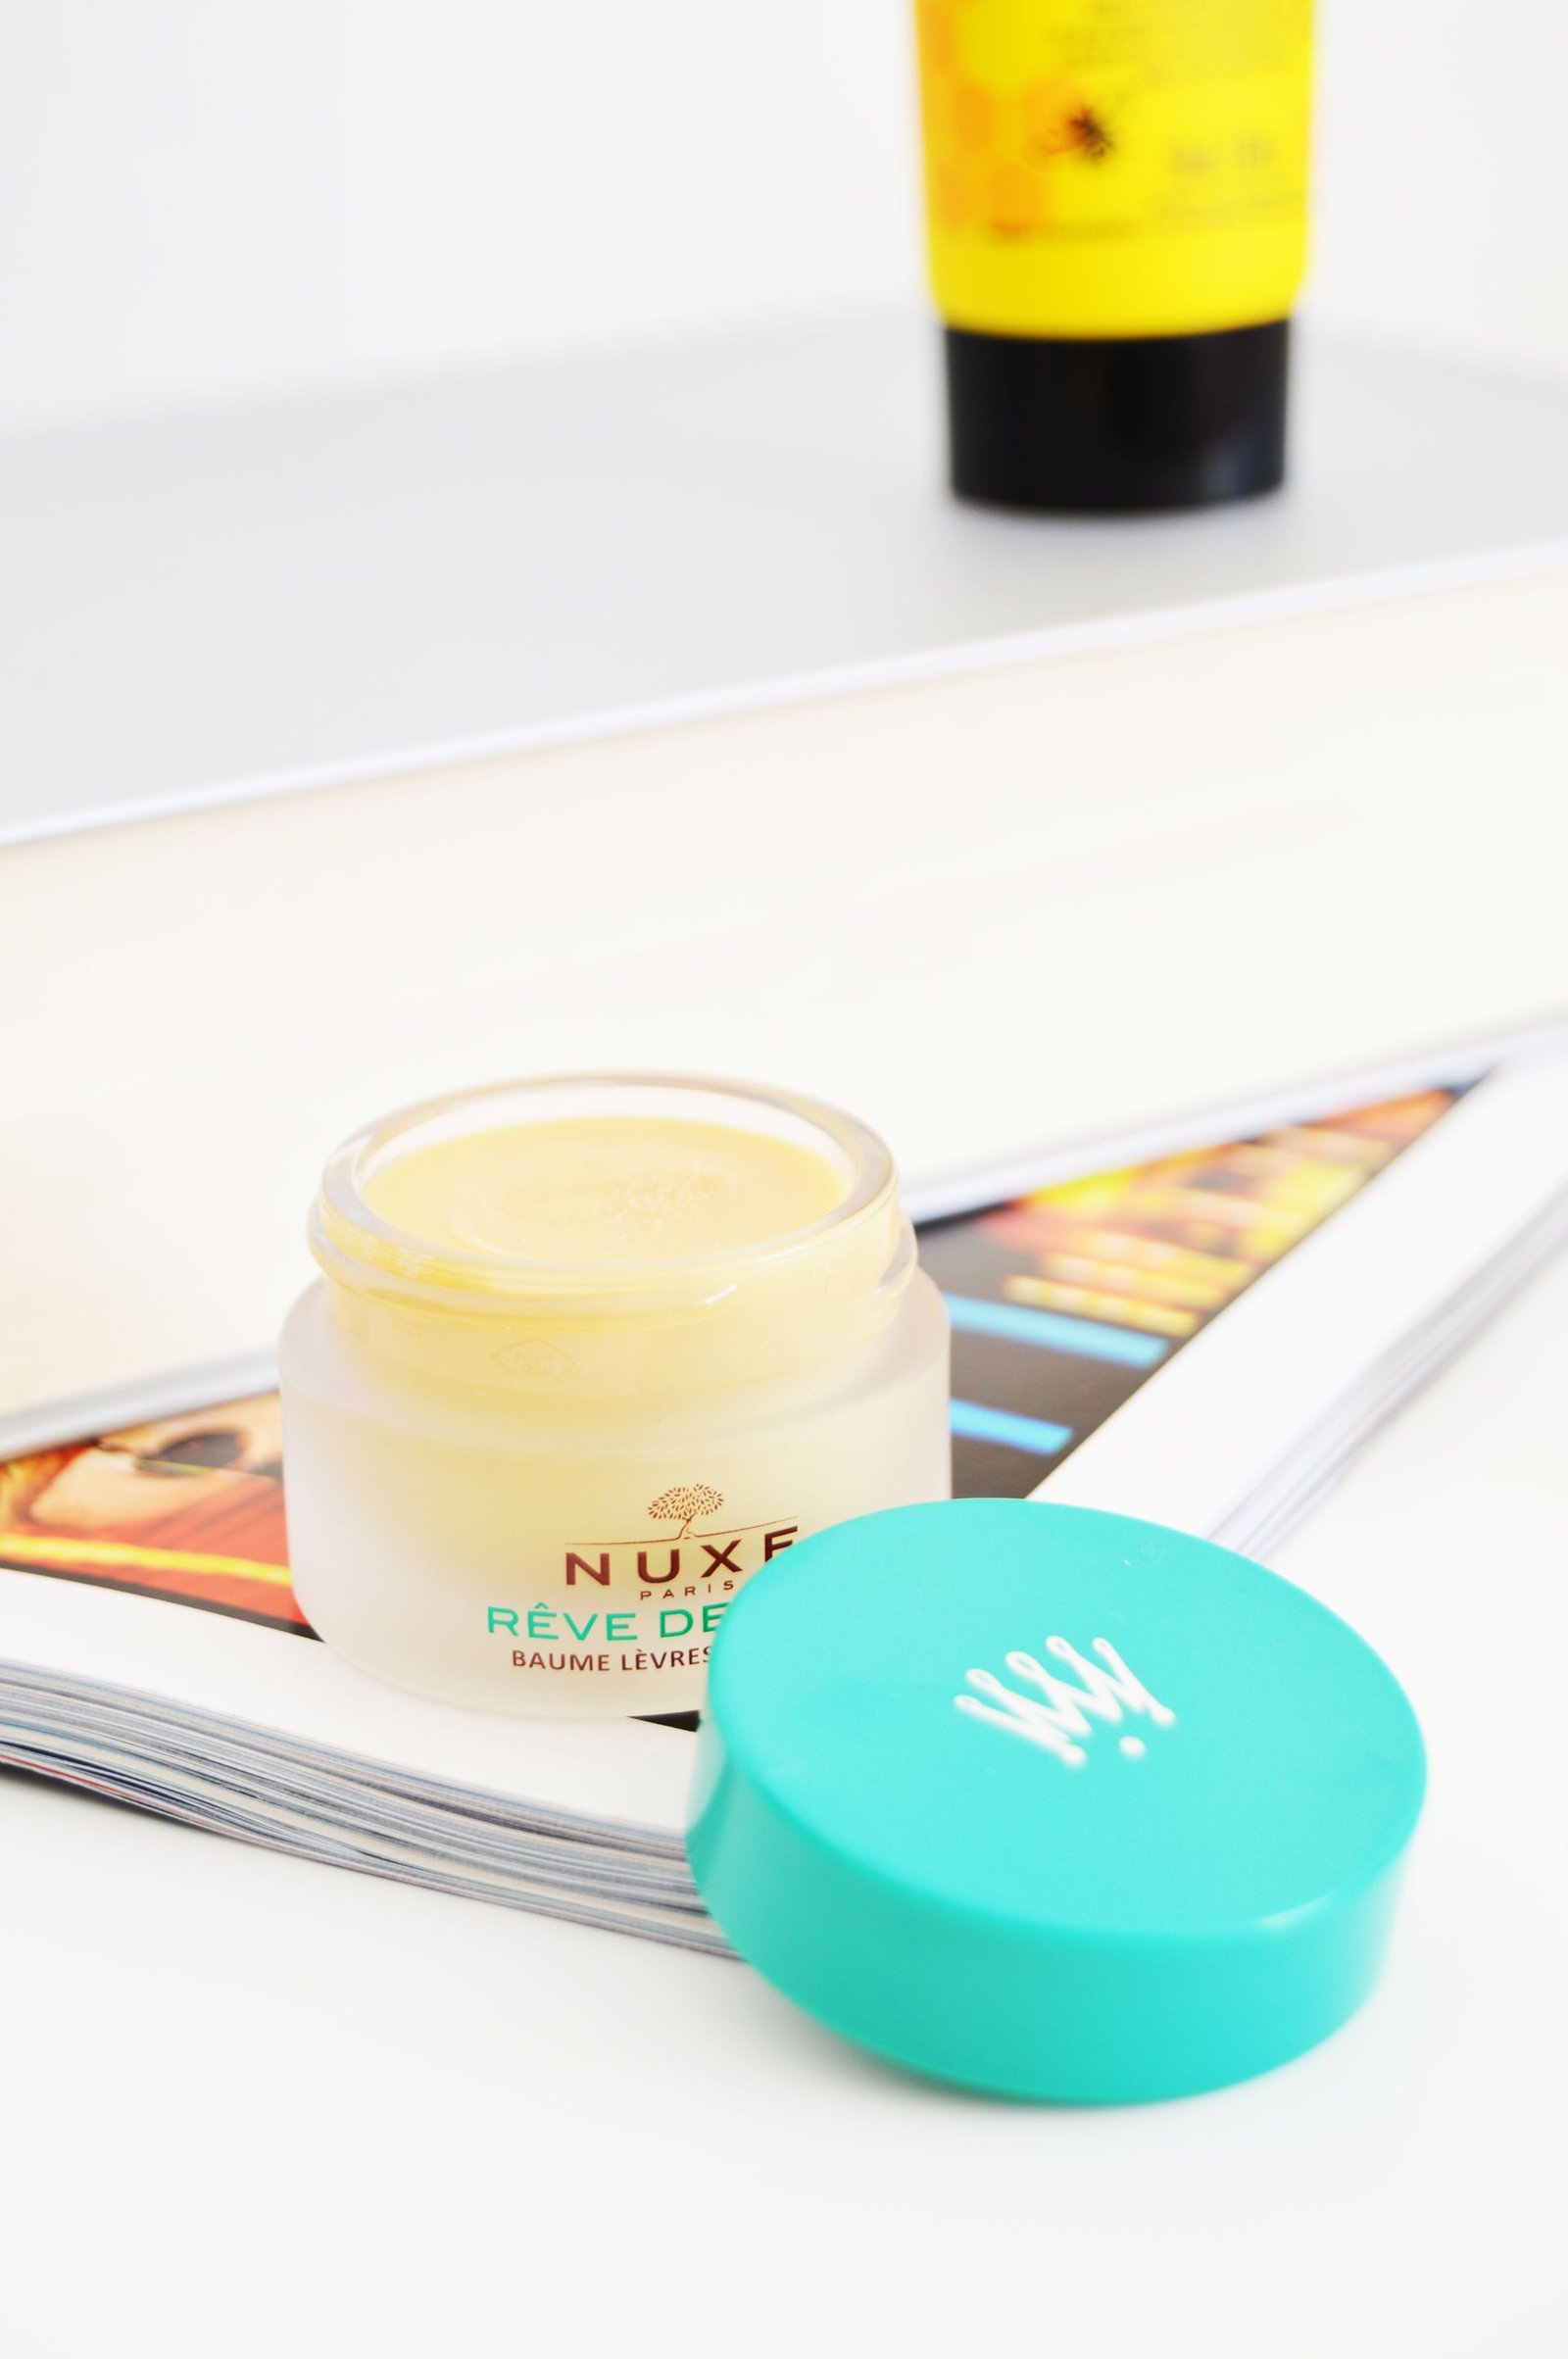 There are some essentials that you should have on your bedside table. Hand cream, lip balm and facial mist are some of these bedside beauty essentials. Nuxe Reve de Miel® - Ultra Nourishing Lip Balm is one heavy duty lip balm that you can add to your bedside beauty essentials. 